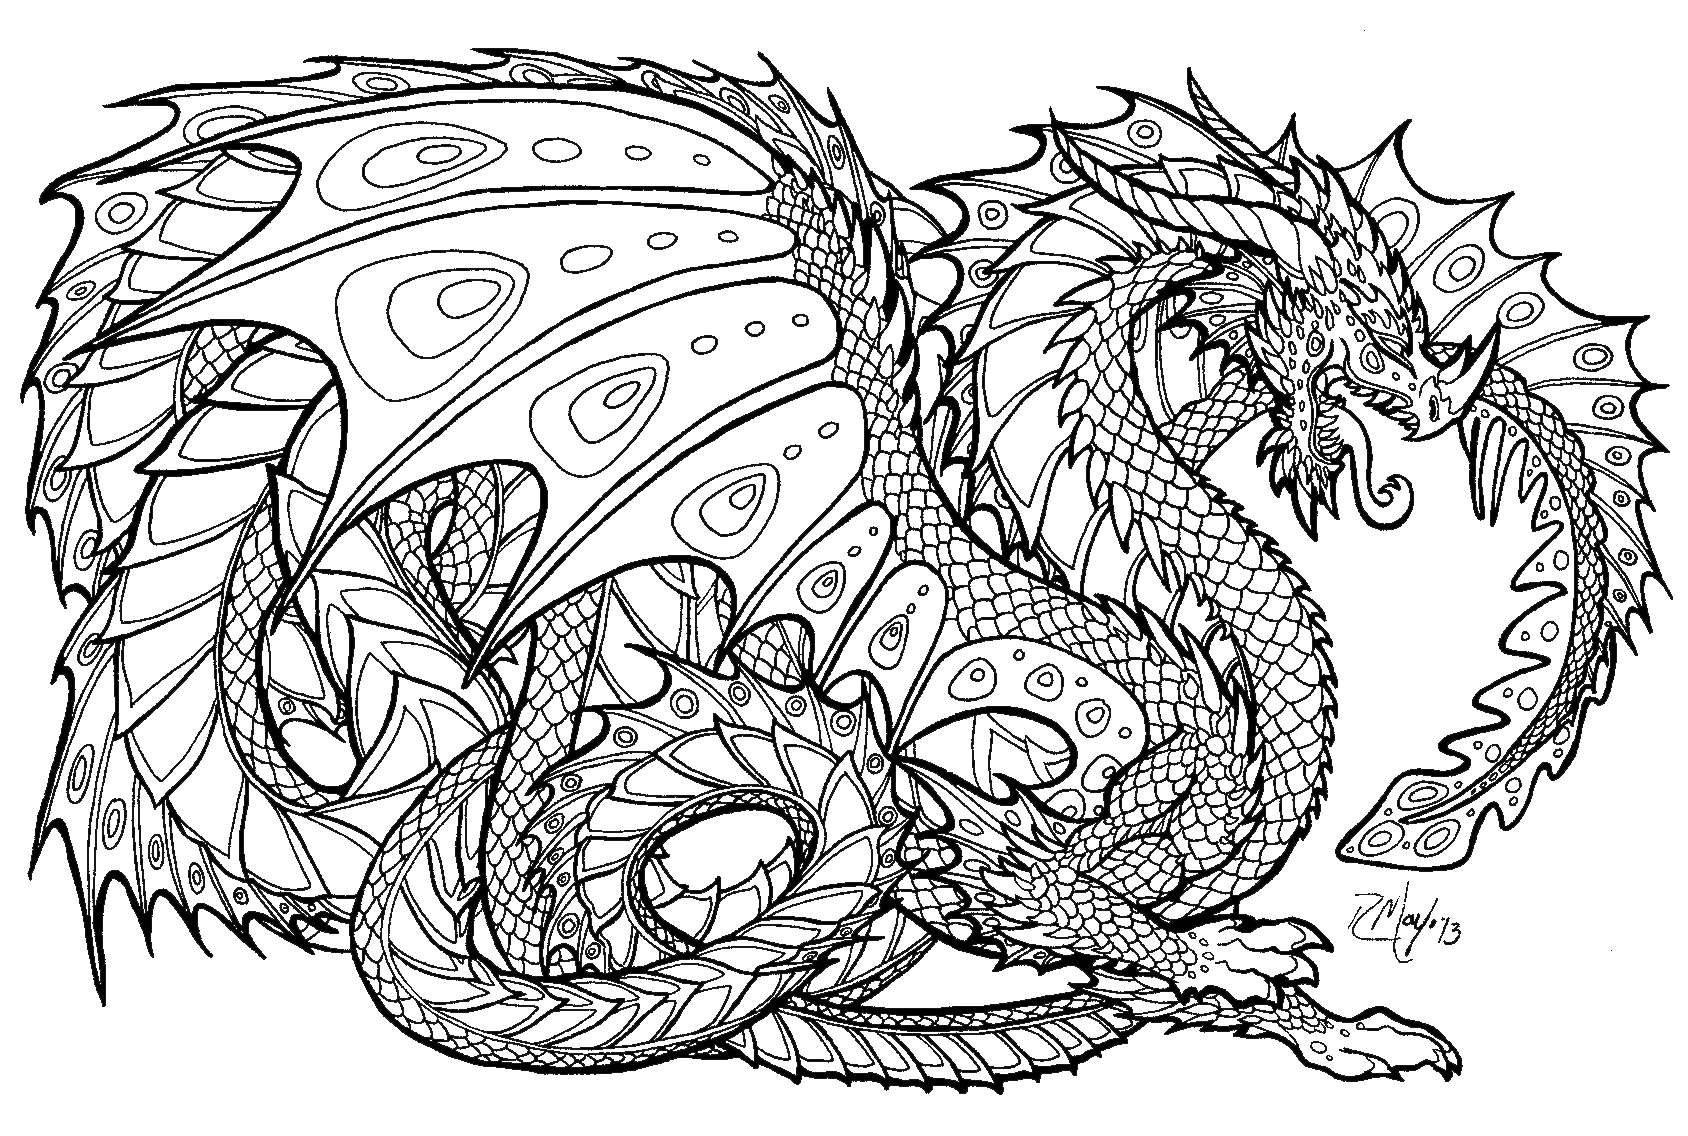 free-coloring-pages-for-adults-nature-download-free-coloring-pages-for